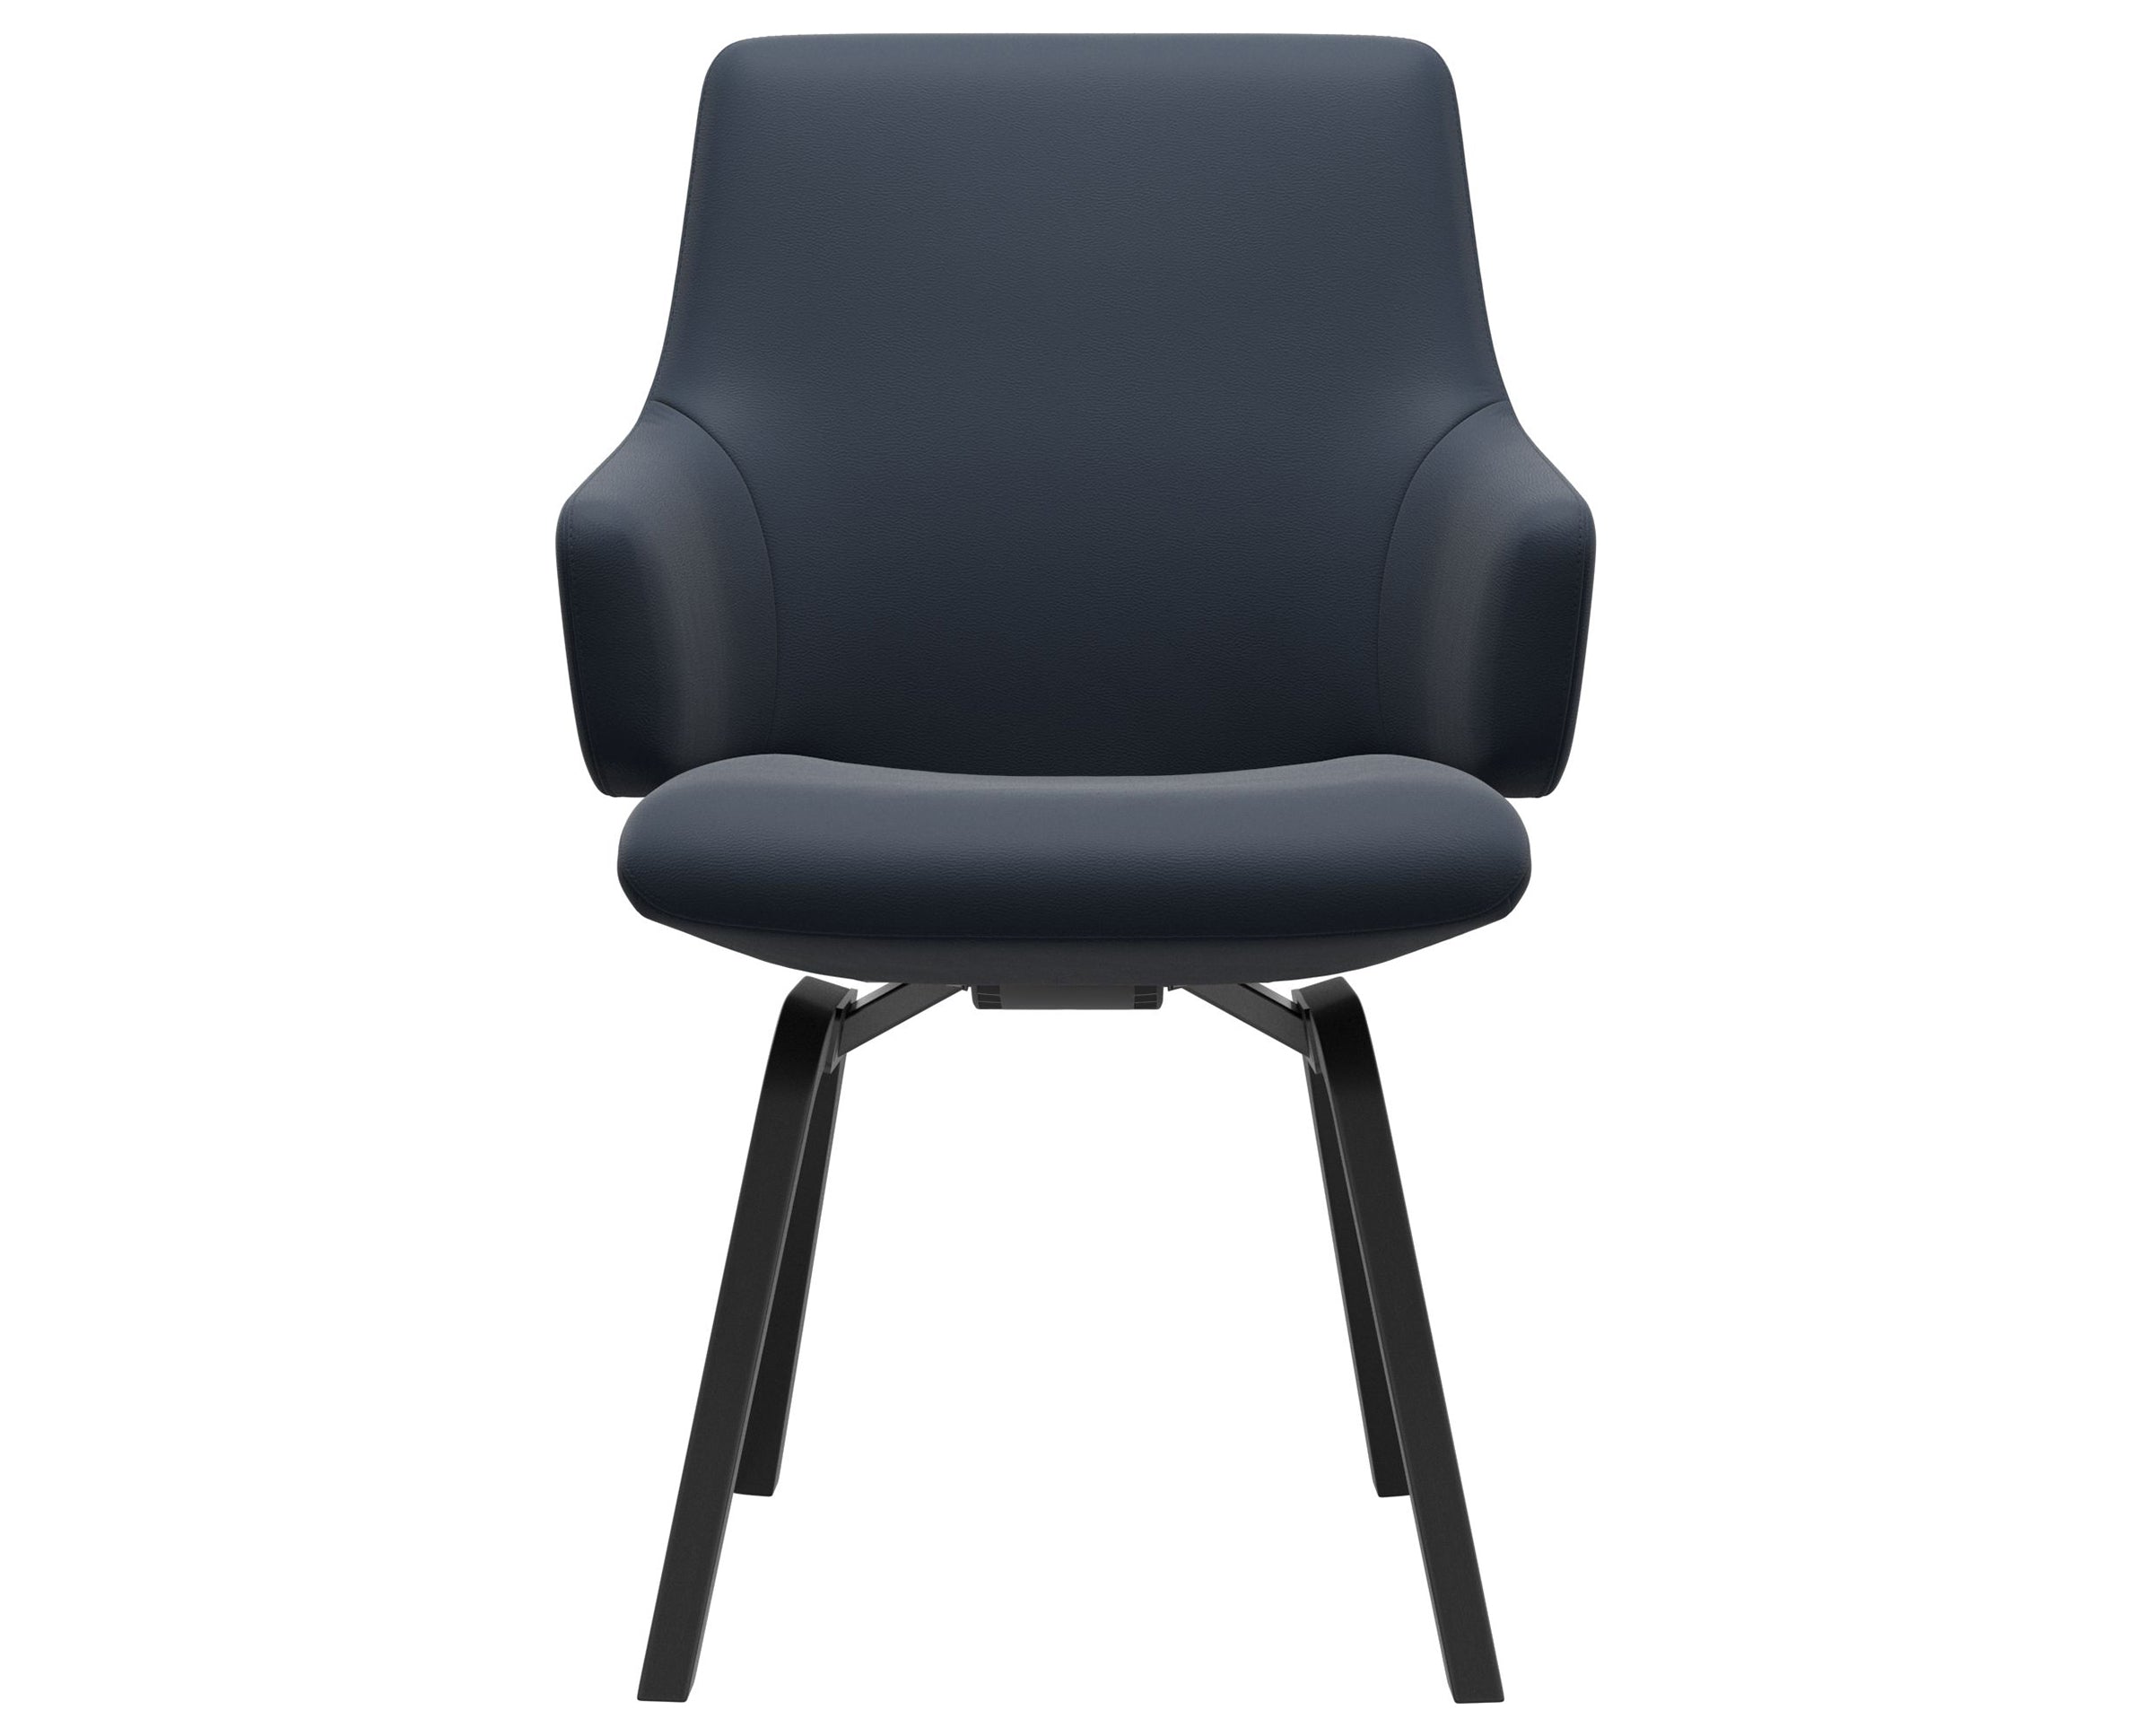 Paloma Leather Oxford Blue and Black Base | Stressless Laurel Low Back D200 Dining Chair w/Arms | Valley Ridge Furniture